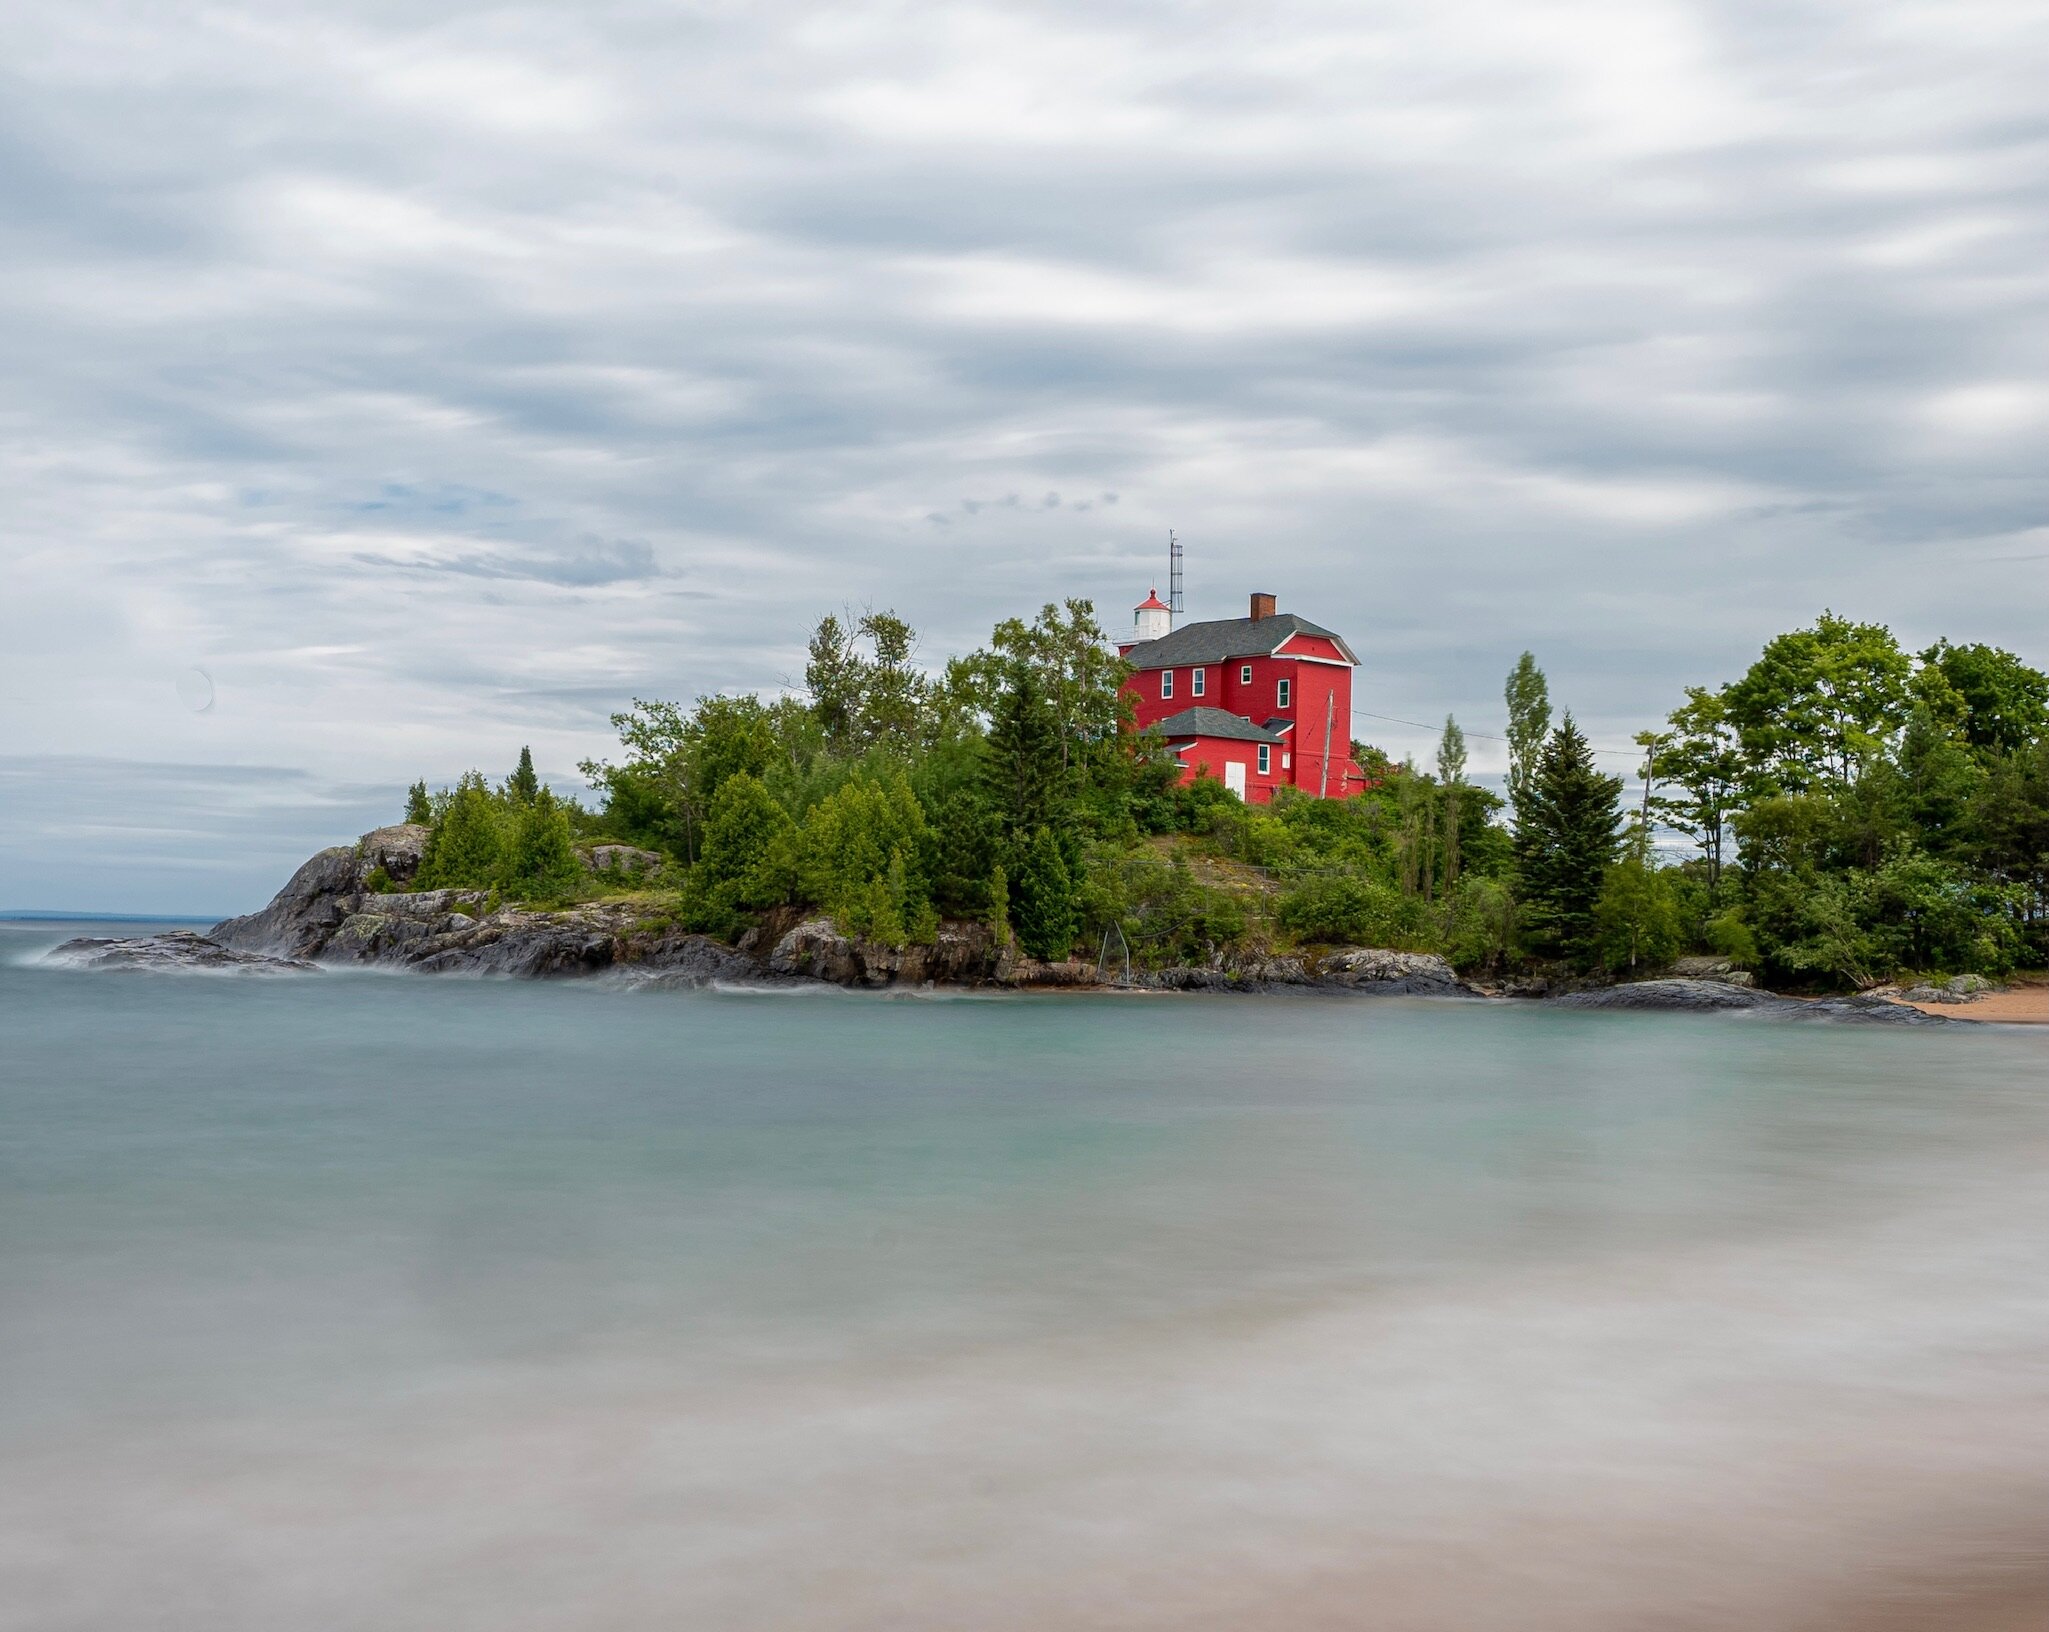  The  Marquette Harbor Lighthouse  is not likely to be the last lighthouse you see from us… we see them often, Craig likes taking pictures of them, and we still have many miles to cover before we are entirely on dry land! 😀🚨😀   